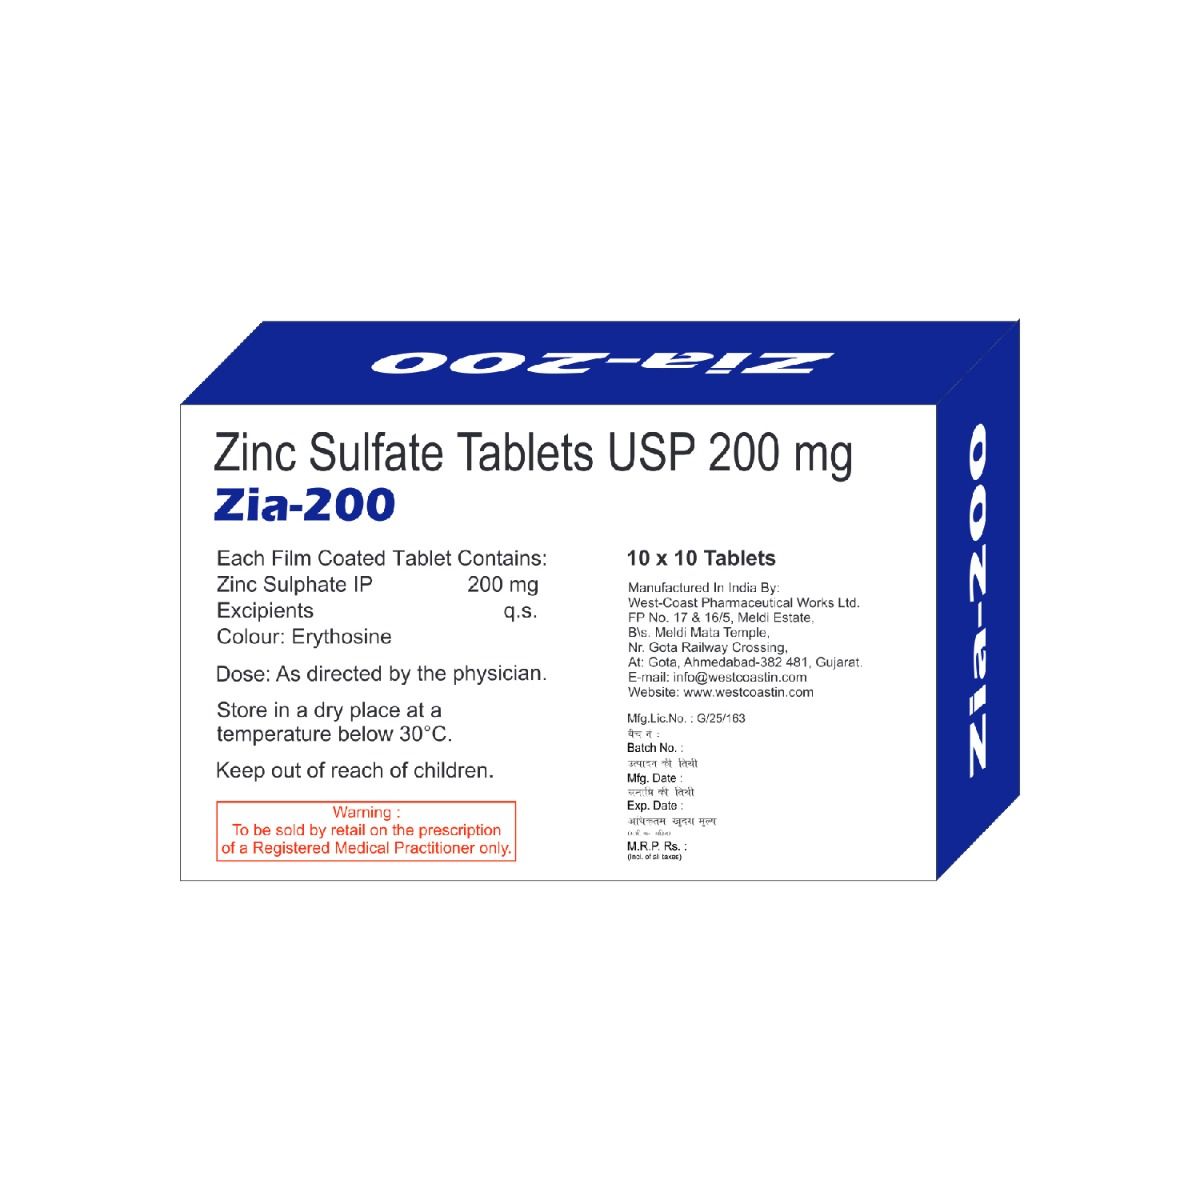 Zia-200 Zinc Sulphate USP 200 mg, 100 Tablets, Pack of 1 